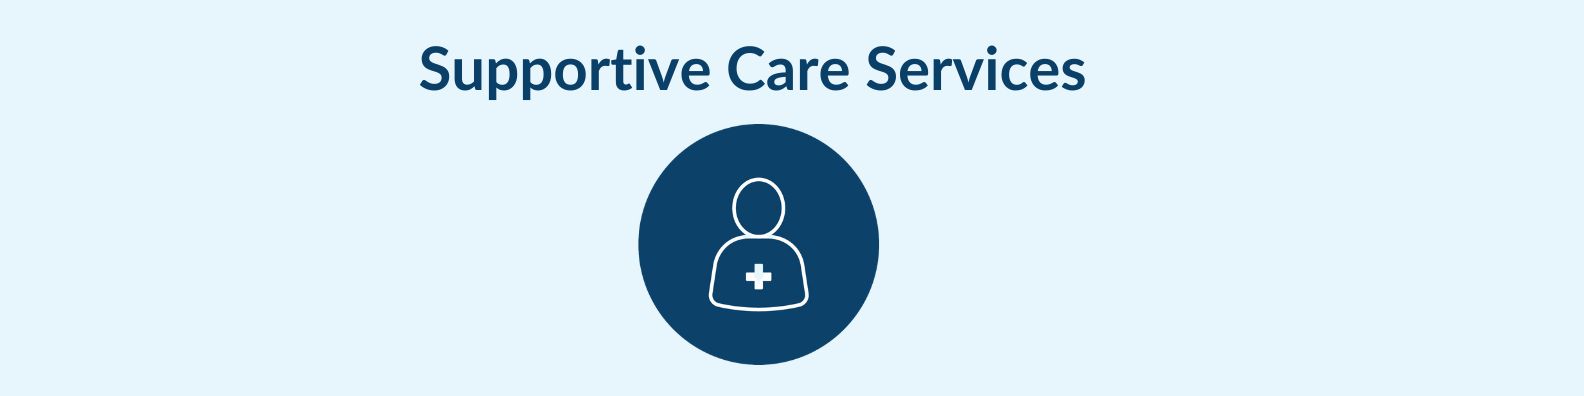 supportive care services banner 